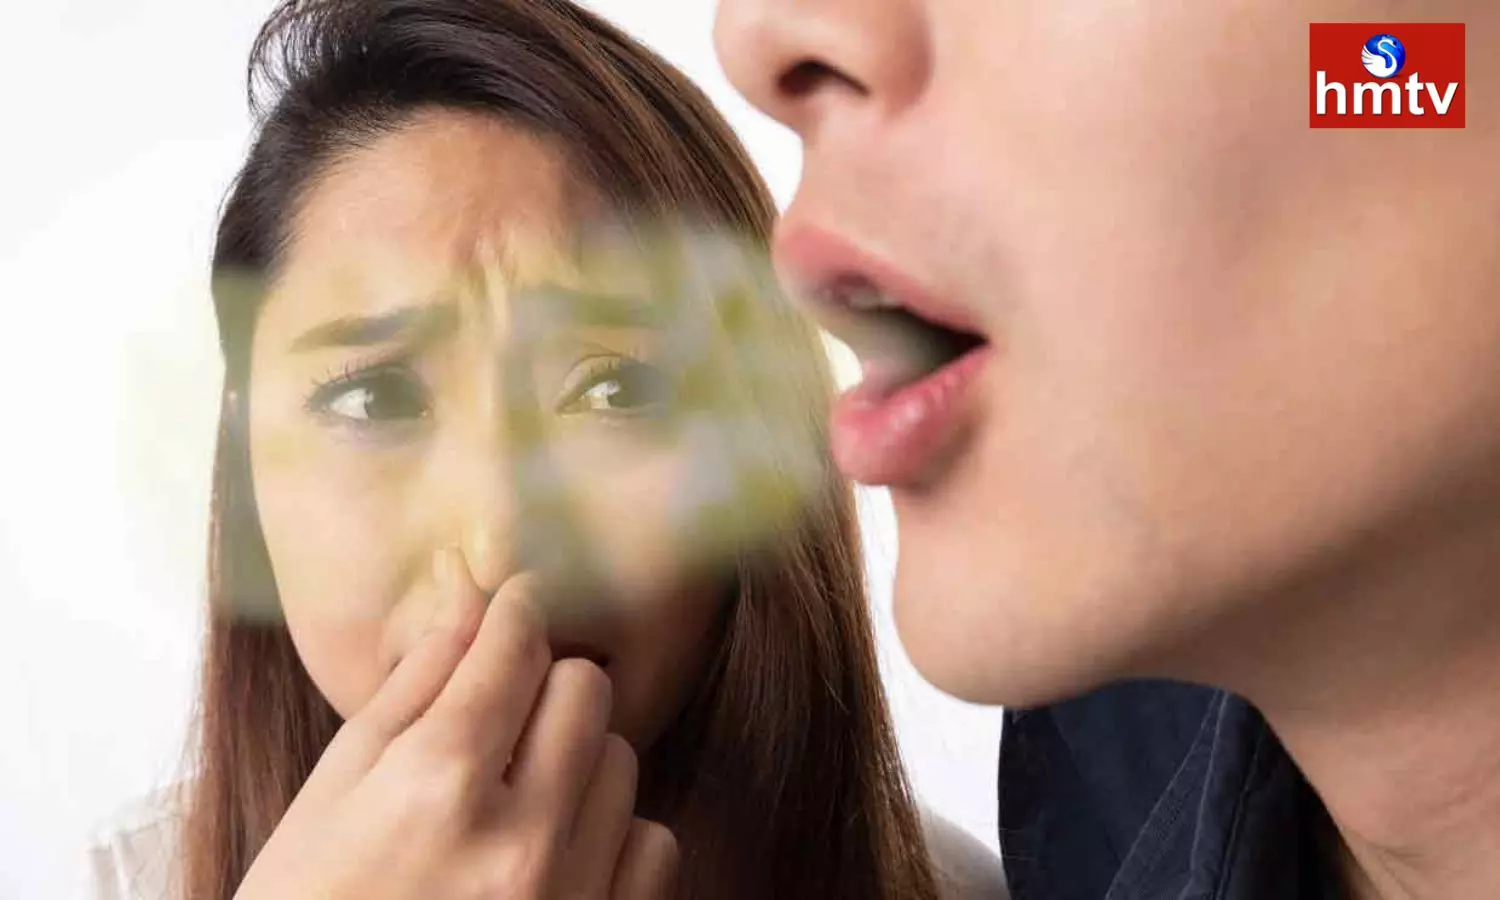 Malfunction of these 3 organs causes bad breath